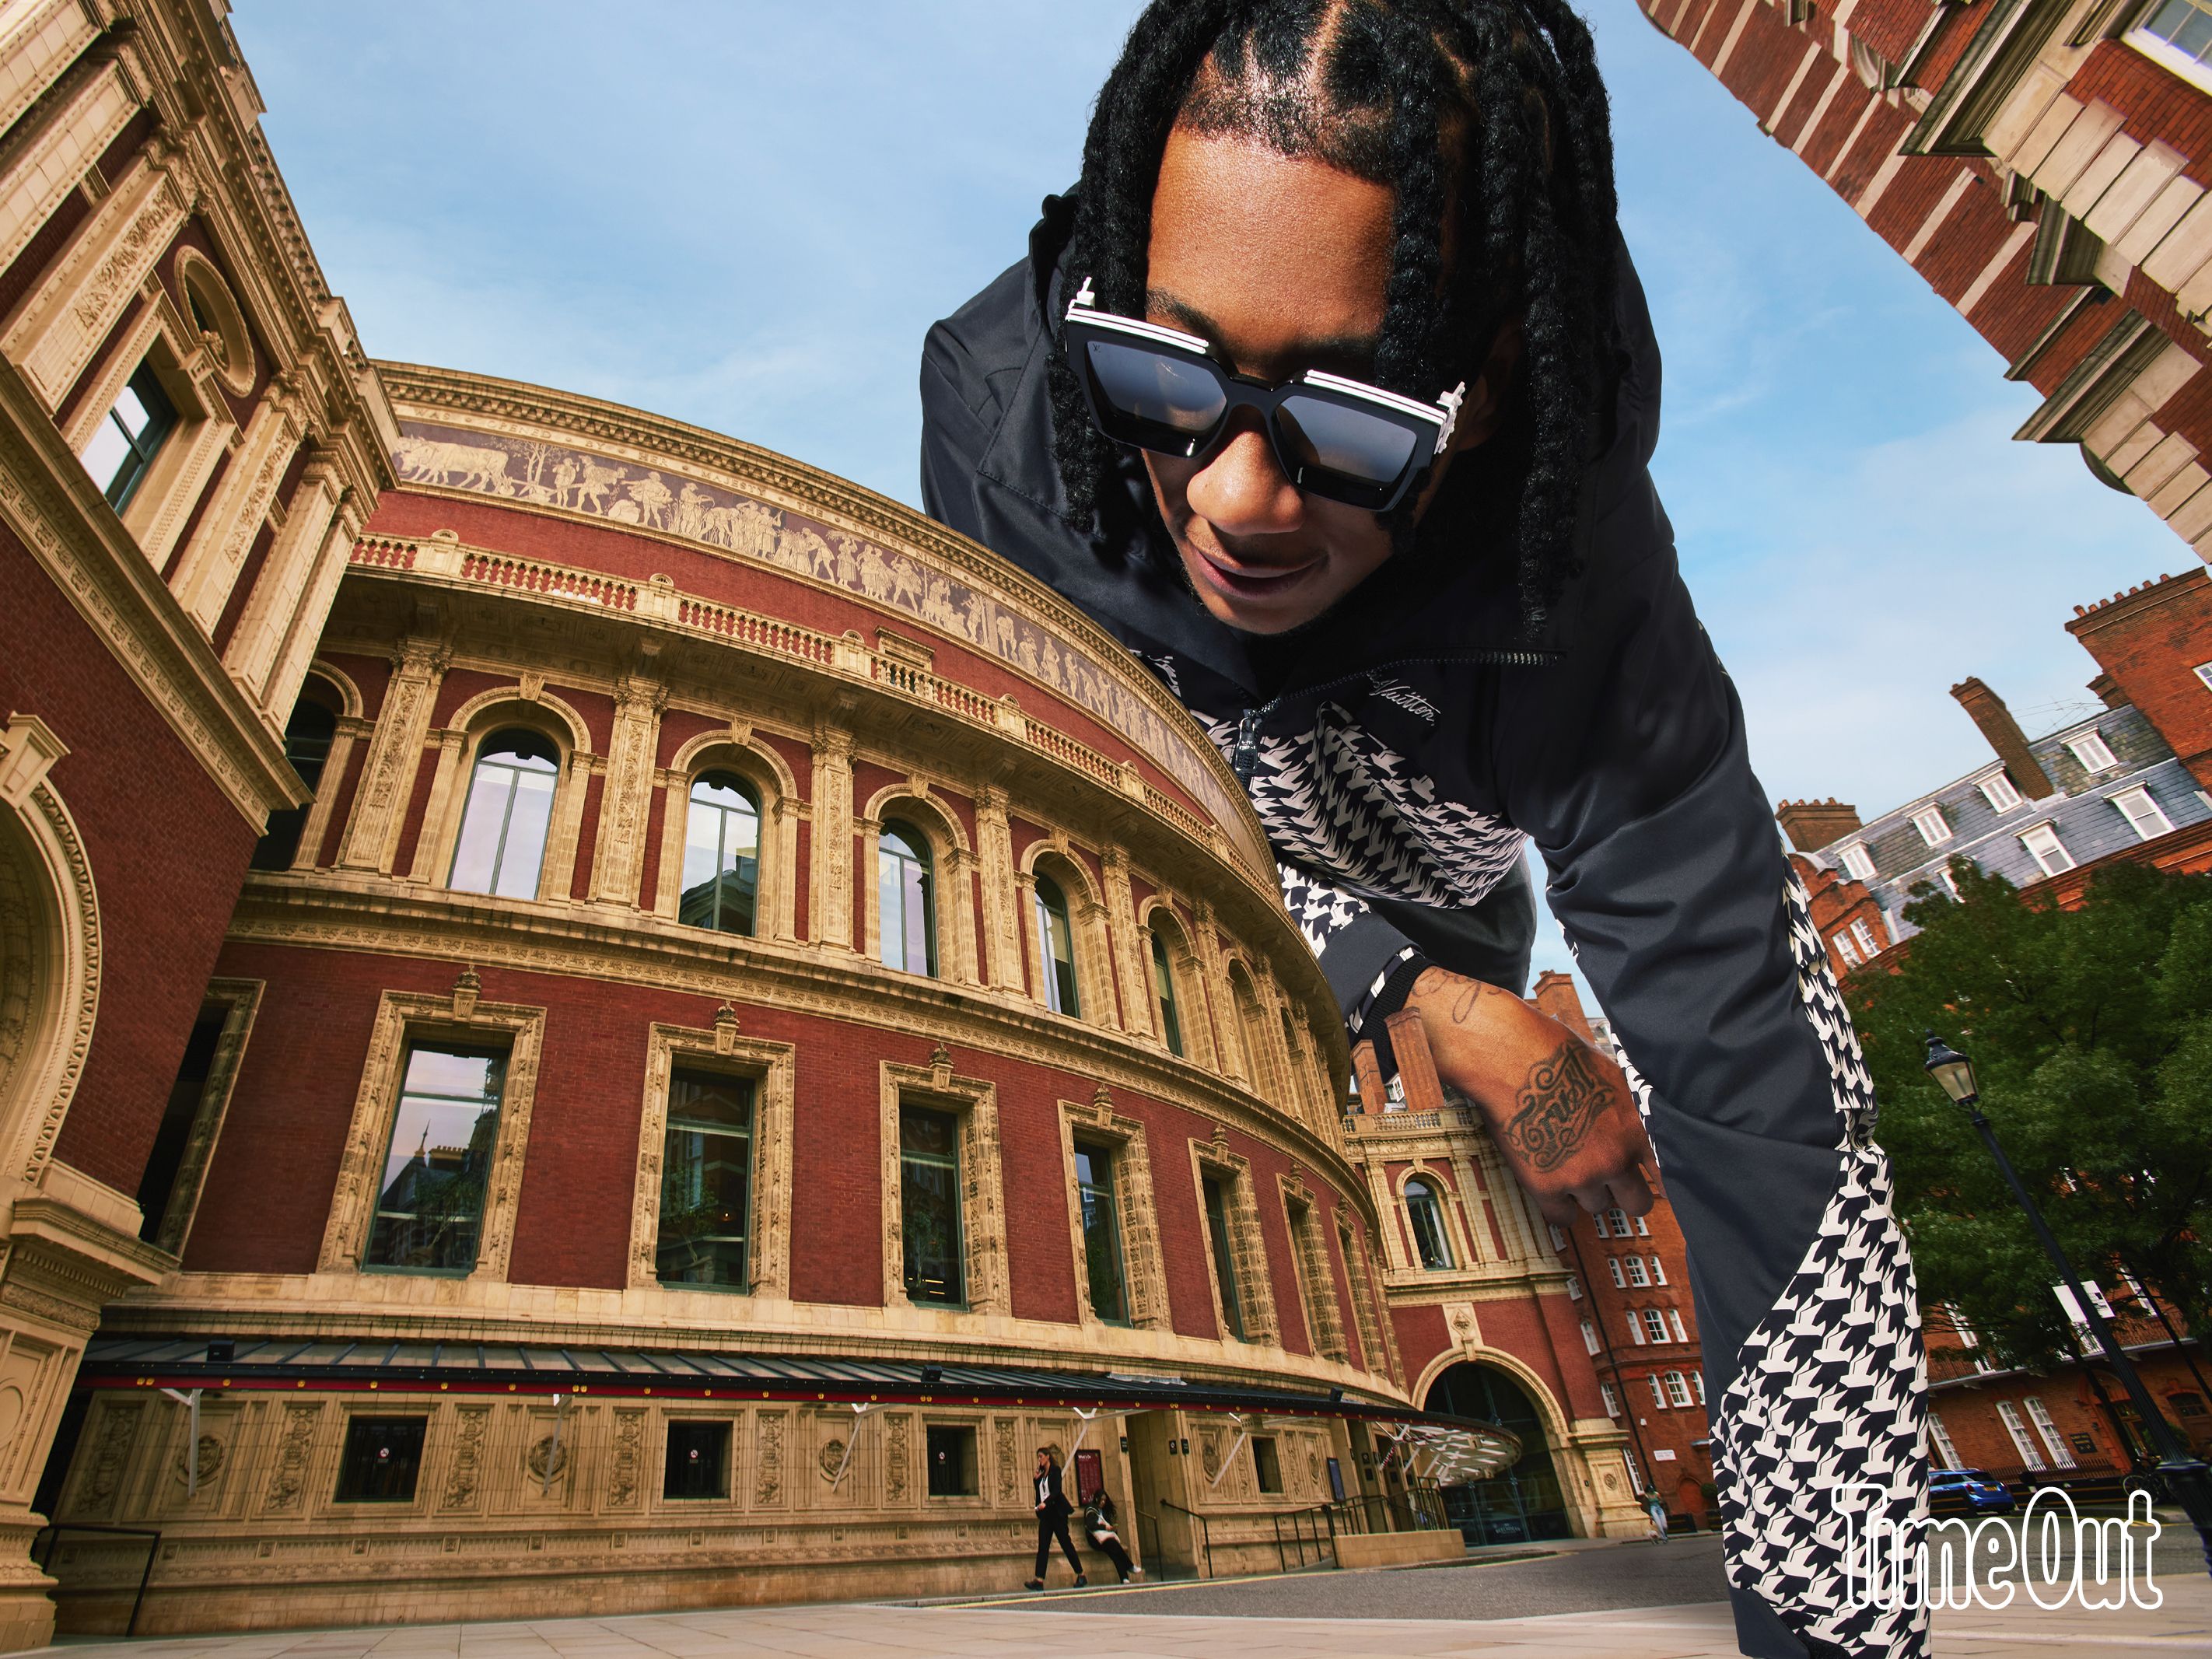 11 things you didn't know about the Royal Albert Hall